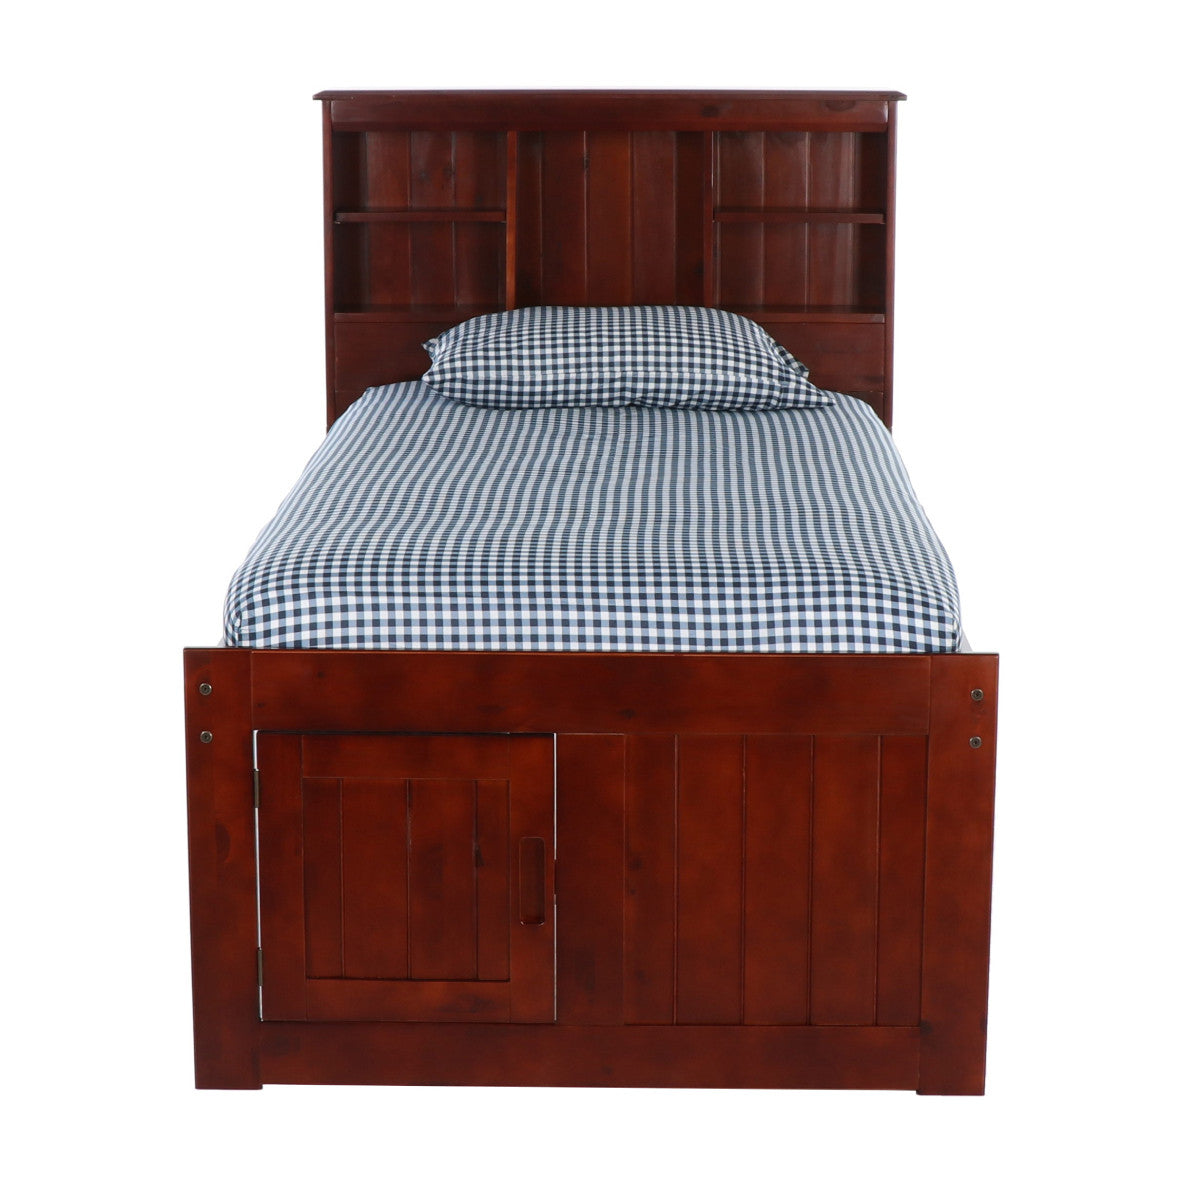 TWIN BOOKCASE BED WITH 6 DRAWER UNDER BED STORAGE IN MERLOT FINISH